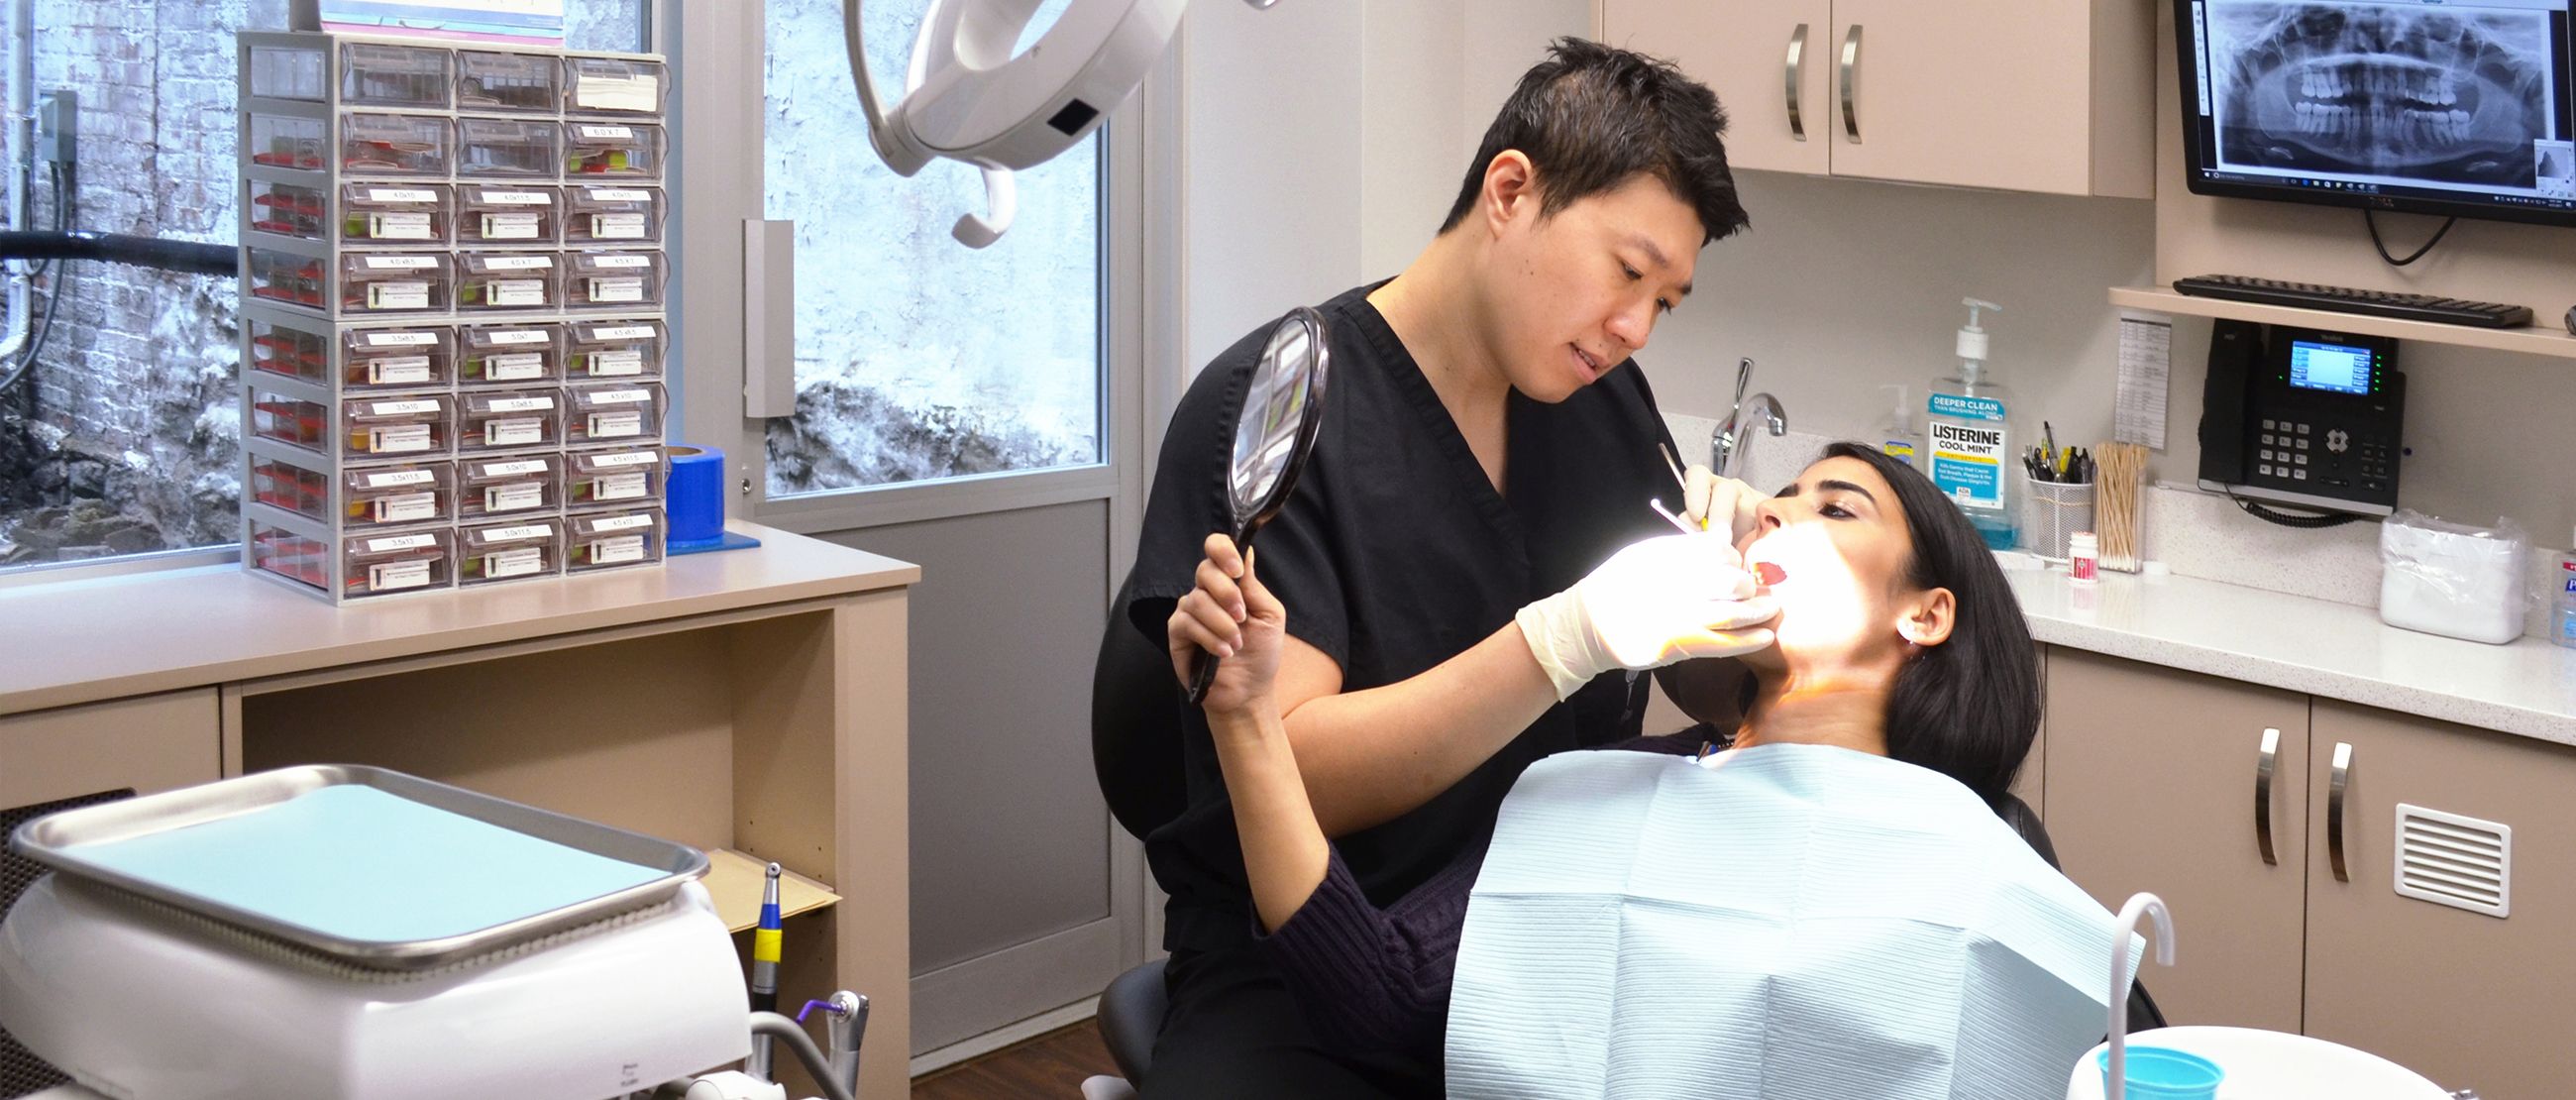 Emergency Treatment by Top-rated Dentist from 209 NYC Dental, proving emergency dental care in New York City dental office